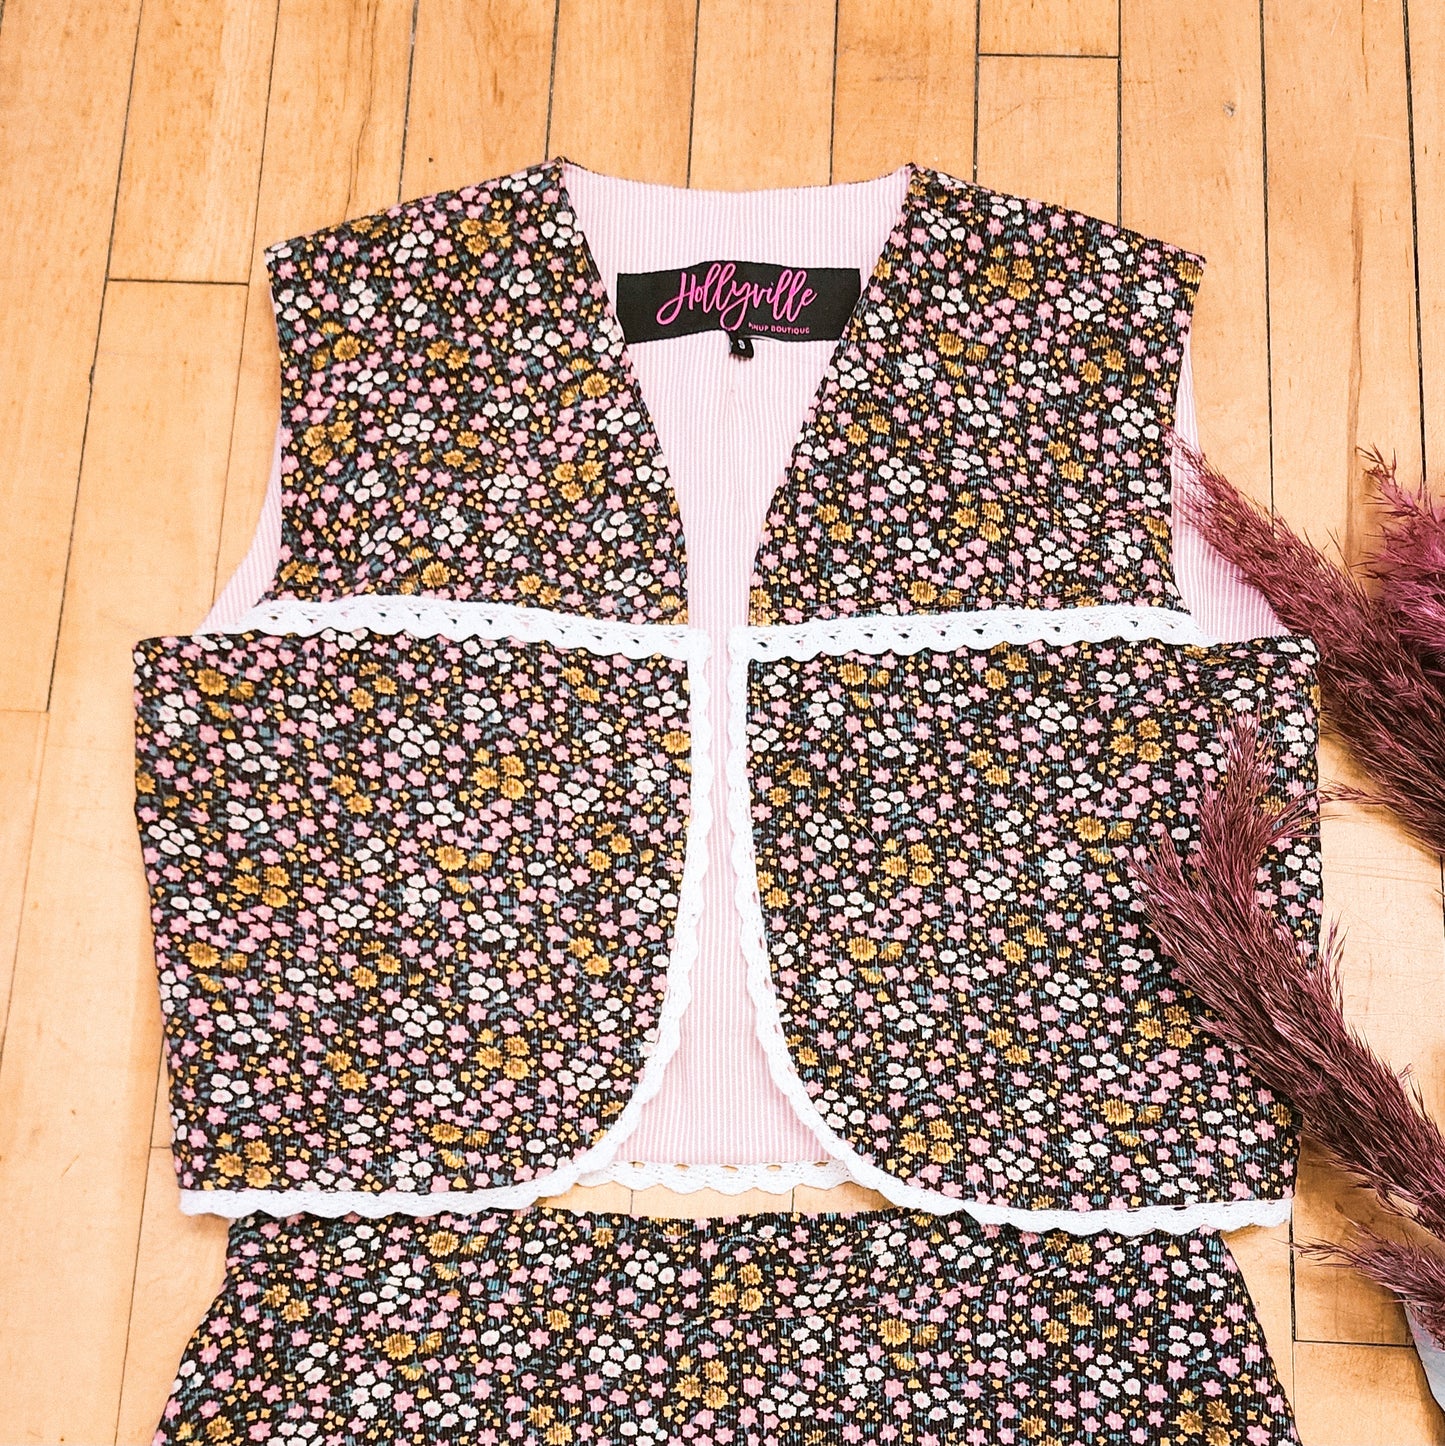 Floral Corduroy Skirt and Vest Matching Set by Hollyville